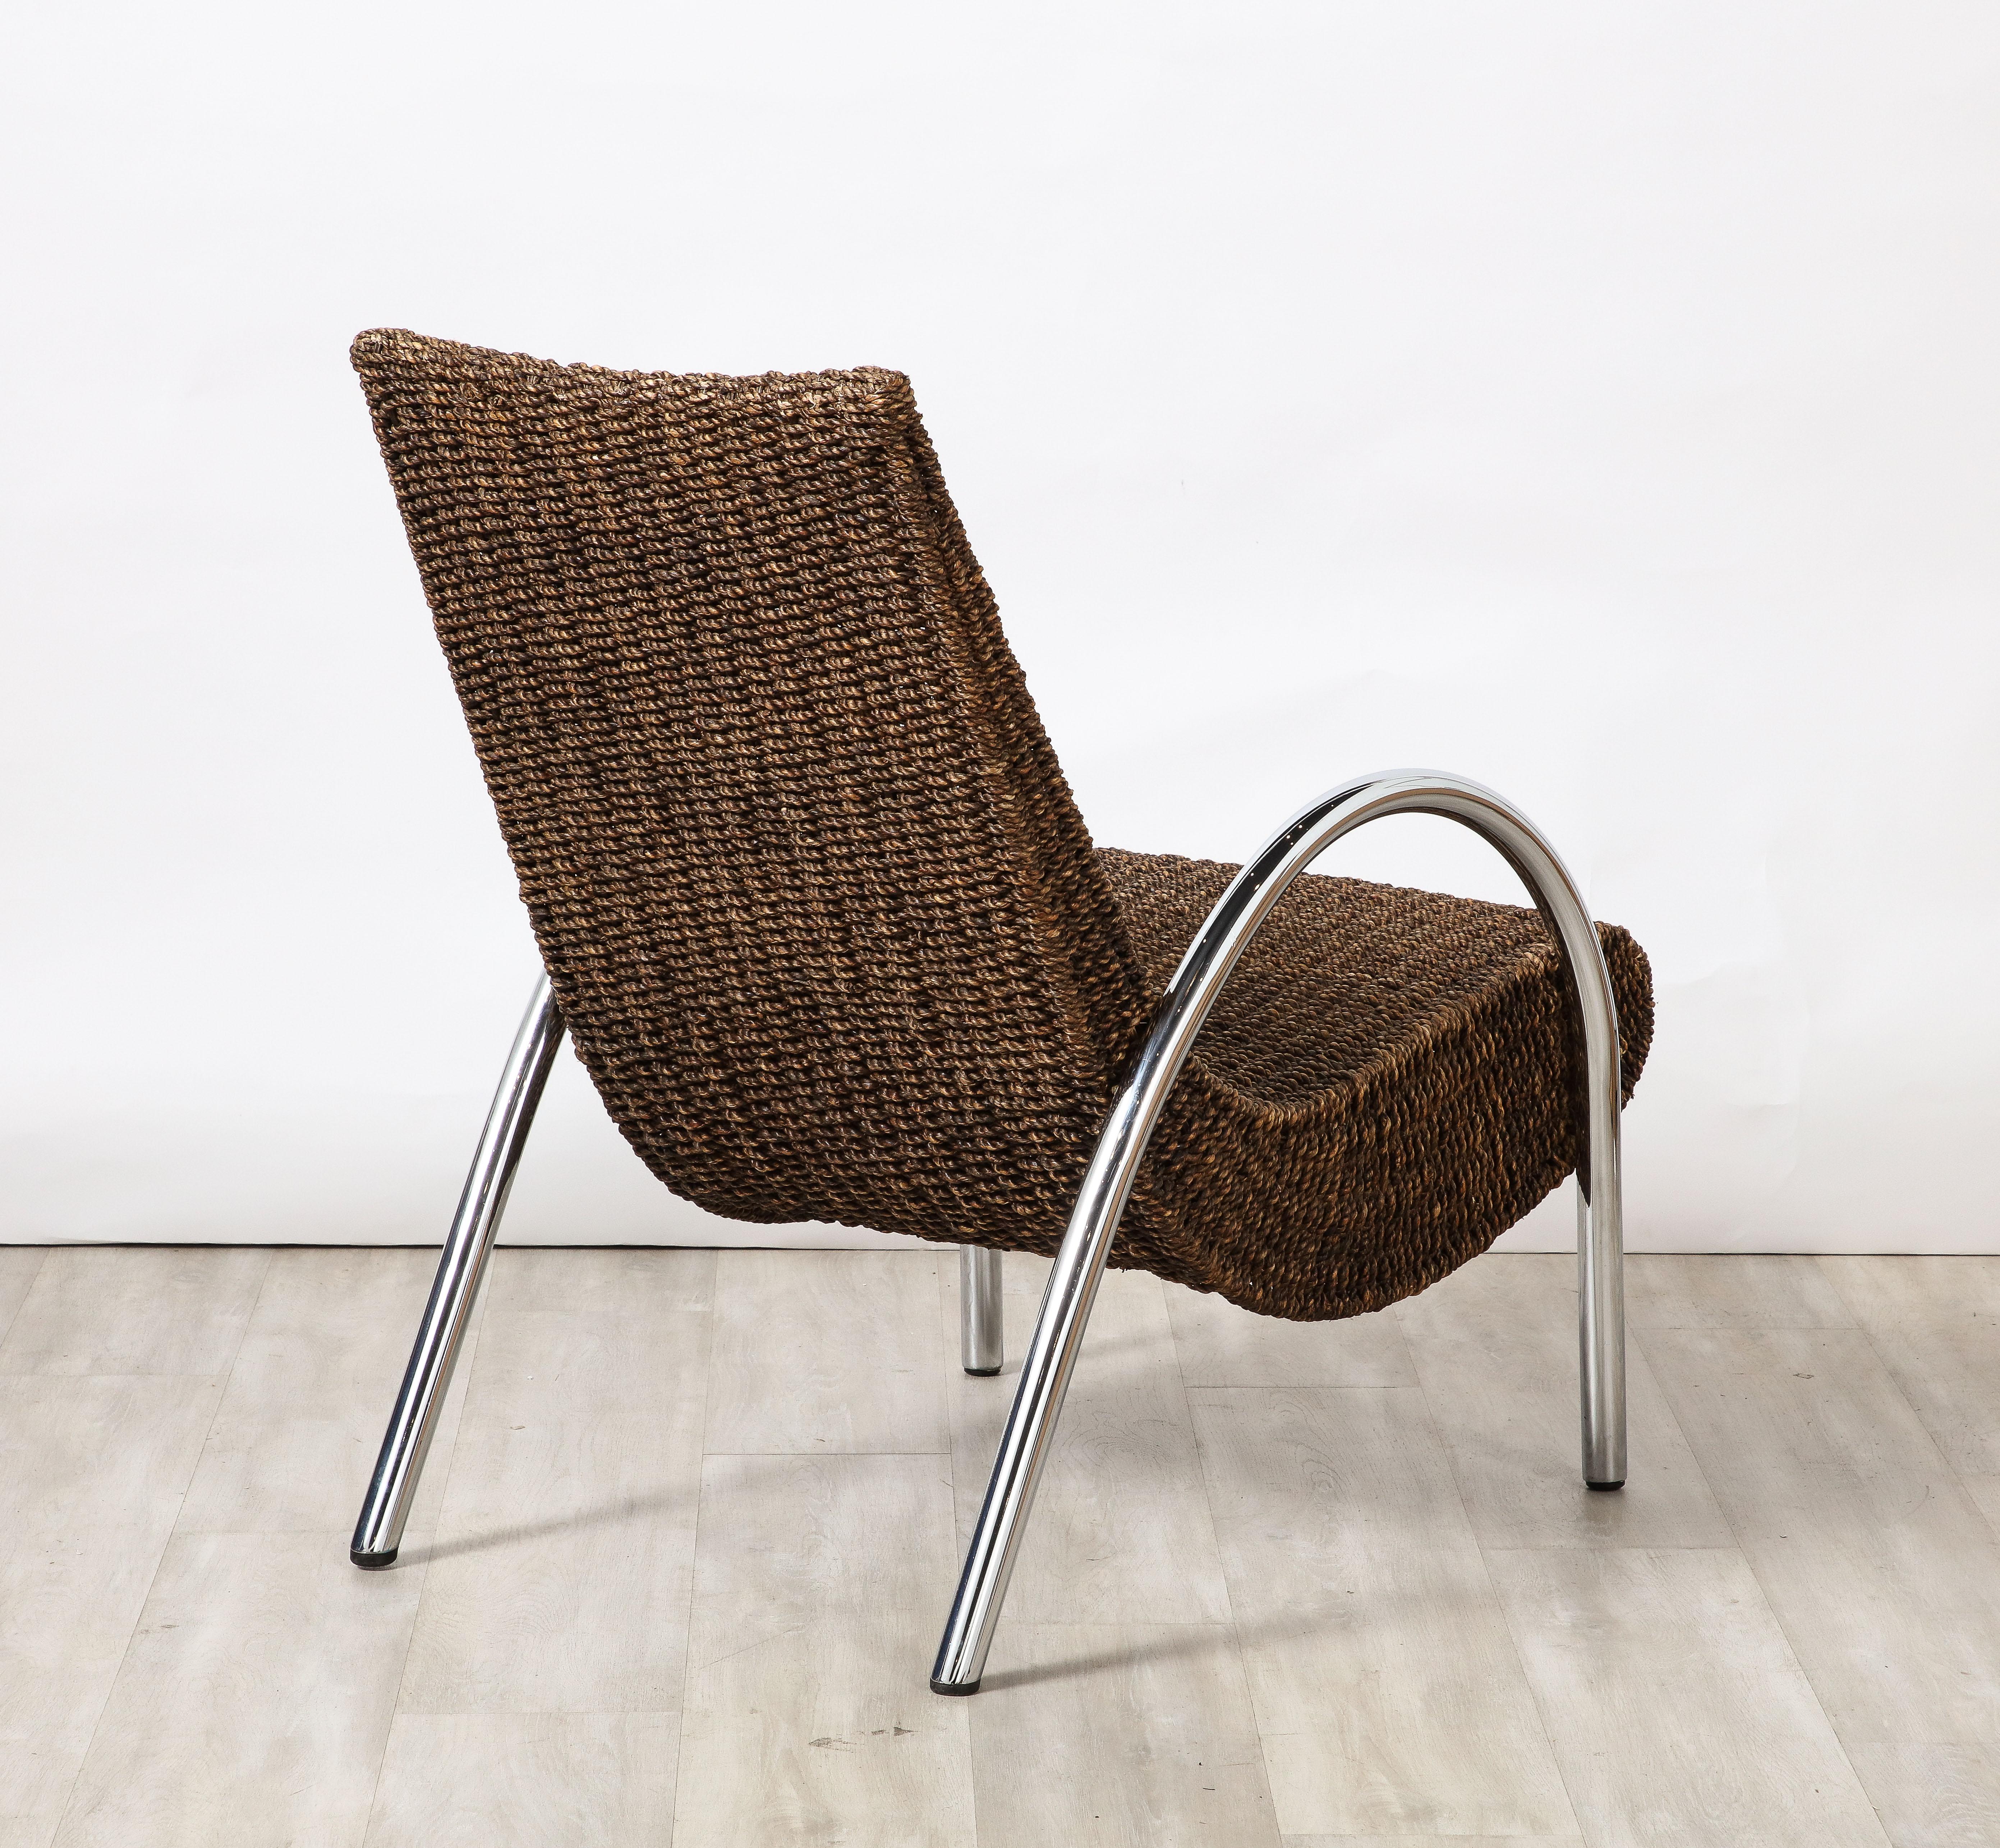 Spanish Bamboo and Chrome Lounge Chair with Ottoman, Spain, circa 1960 For Sale 9